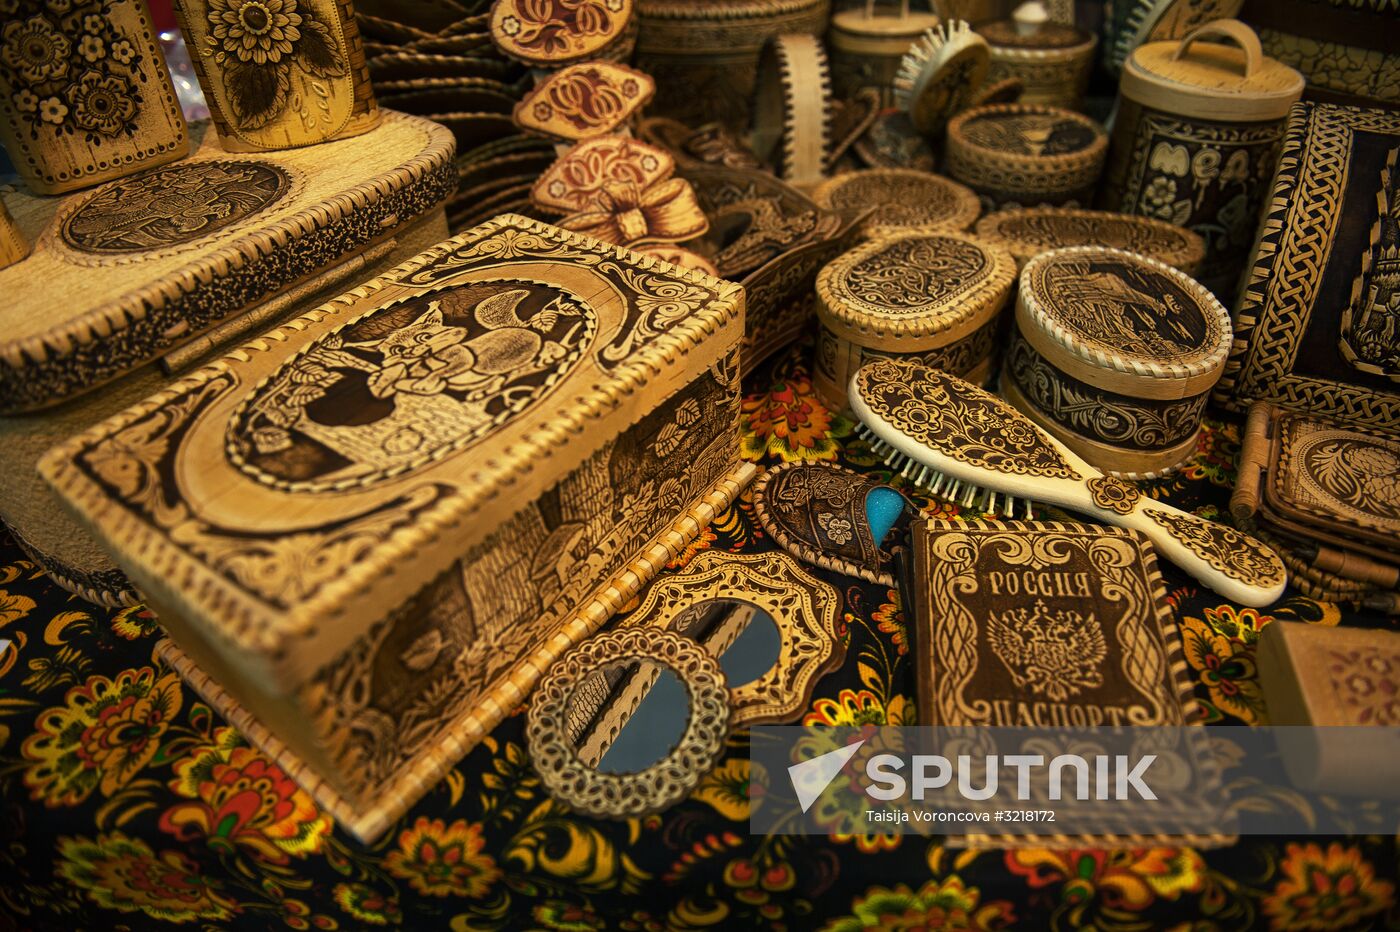 Golden Fall agriculture exhibition in Tomsk